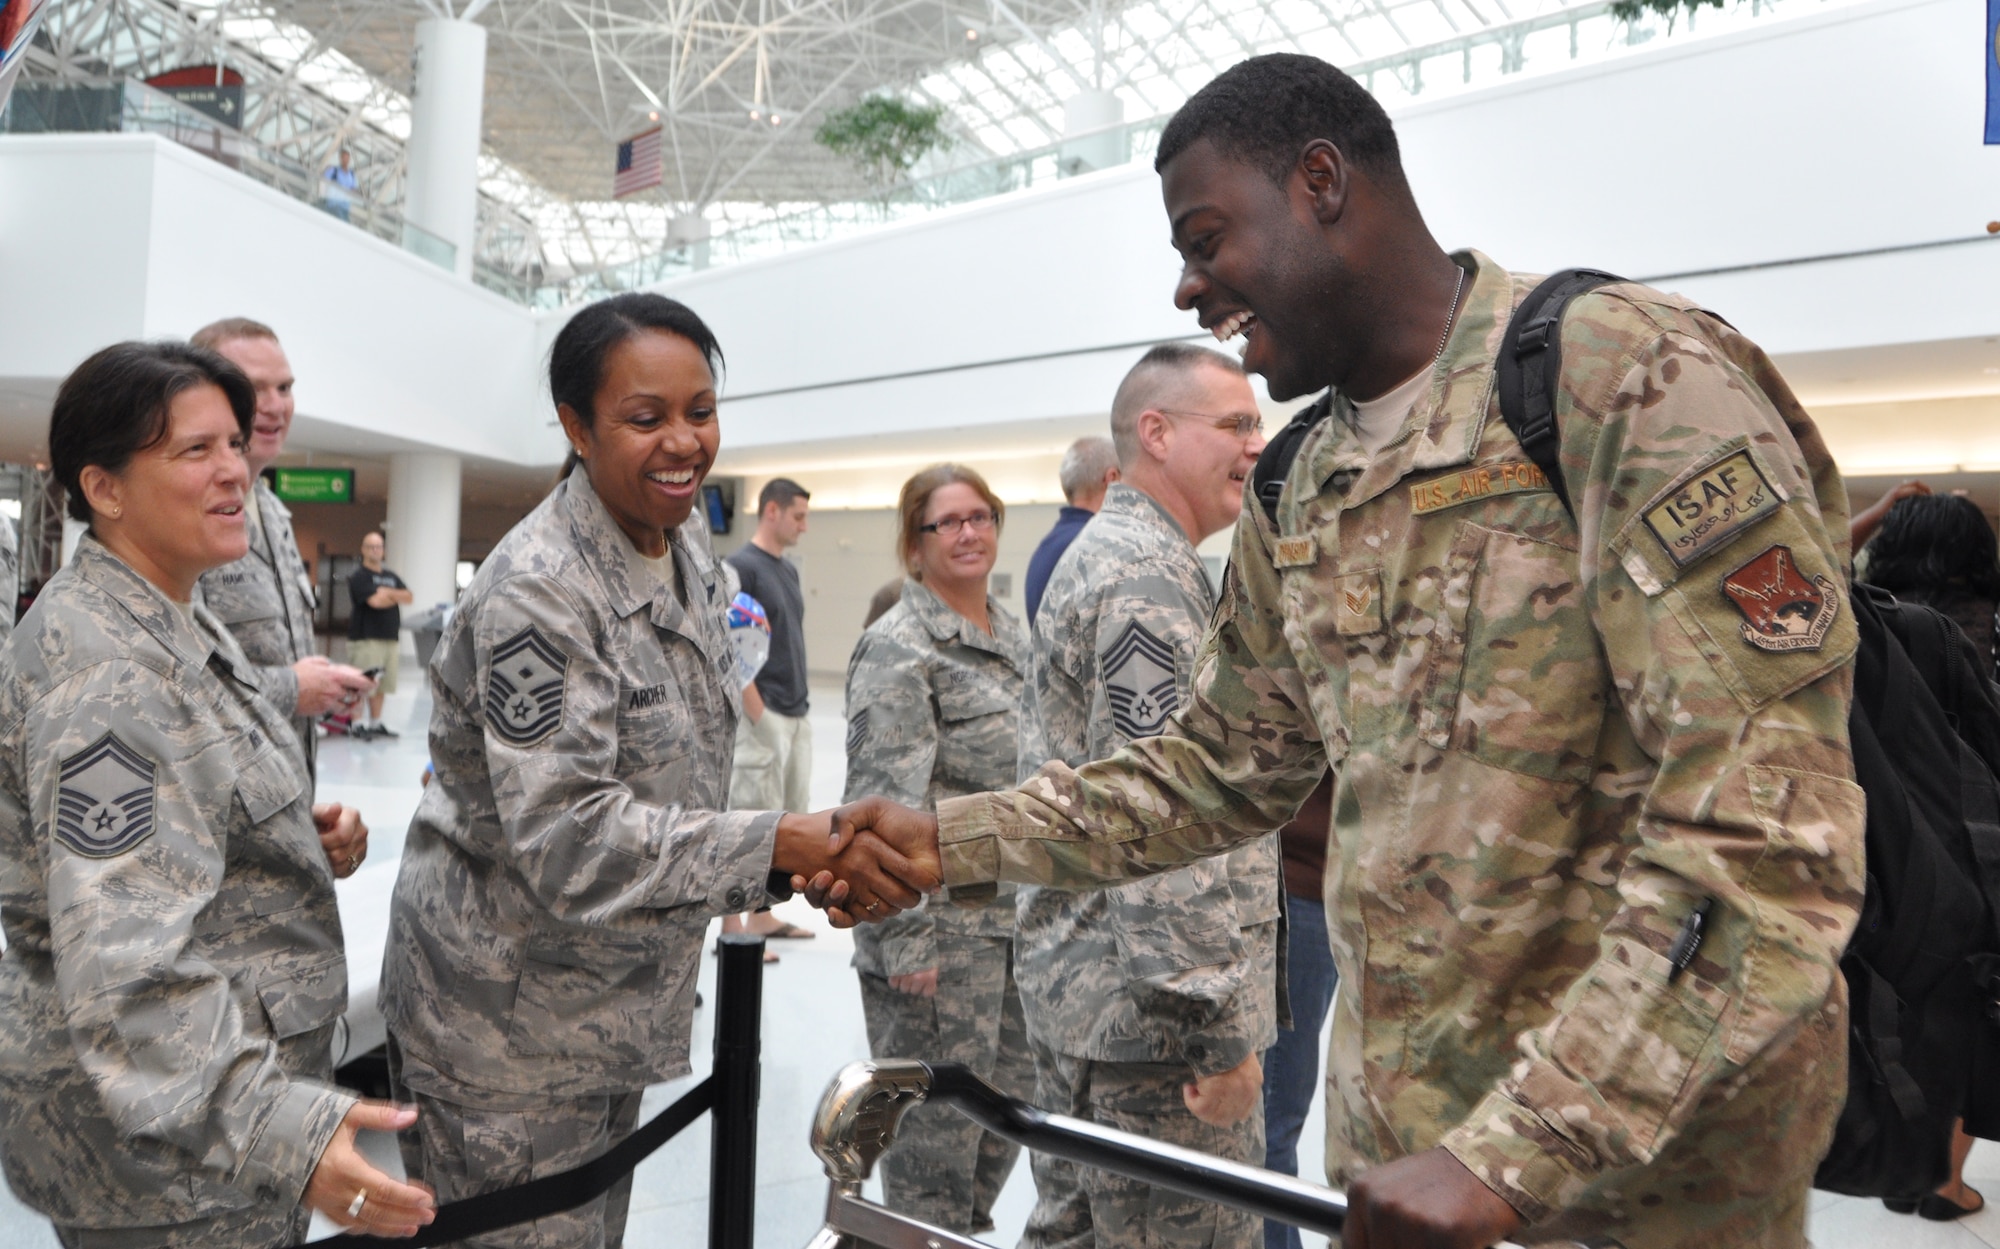 U.S. Air Force Staff Sgt. Carl Johnson, 69th Aerial Port Squadron, shakes the hand of Air Force Senior Master Sgt. Diana Archer, 69 APS first sergeant, at Baltimore-Washington International Thurgood Marshall Airport, Md., Aug. 24, 2012. The 69 APS welcomed home 15 troops who were returning from a six-month deployment to Afghanistan. (U.S. Air Force photo/ Senior Airman Katie Spencer) 